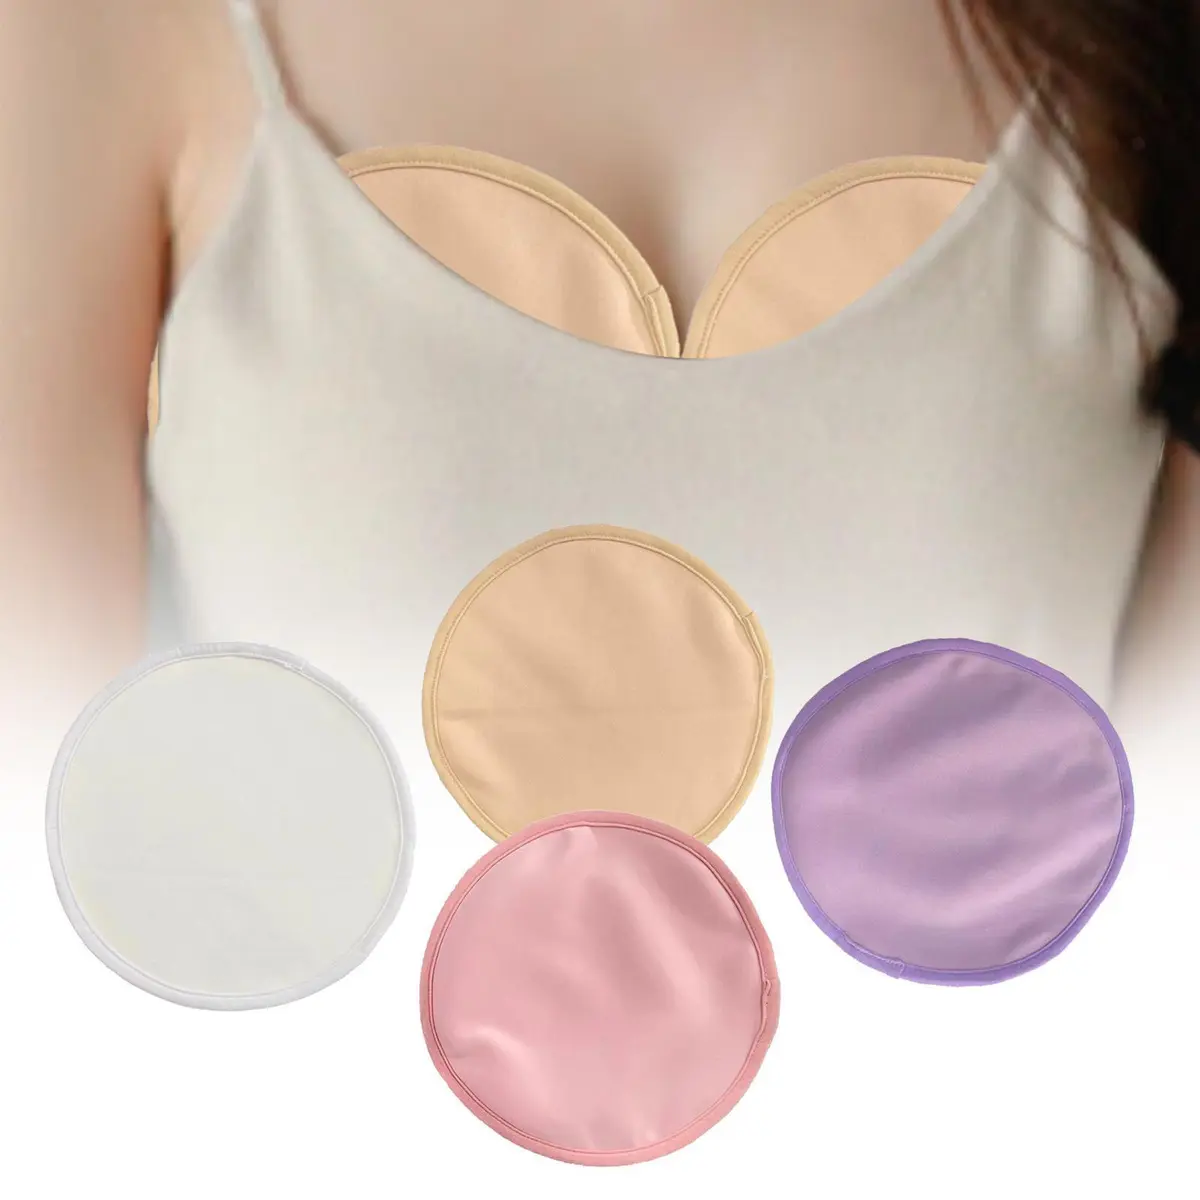 Castor Oil Breast Pads Washable Castor Oil Pack Compress for Women Daily Use